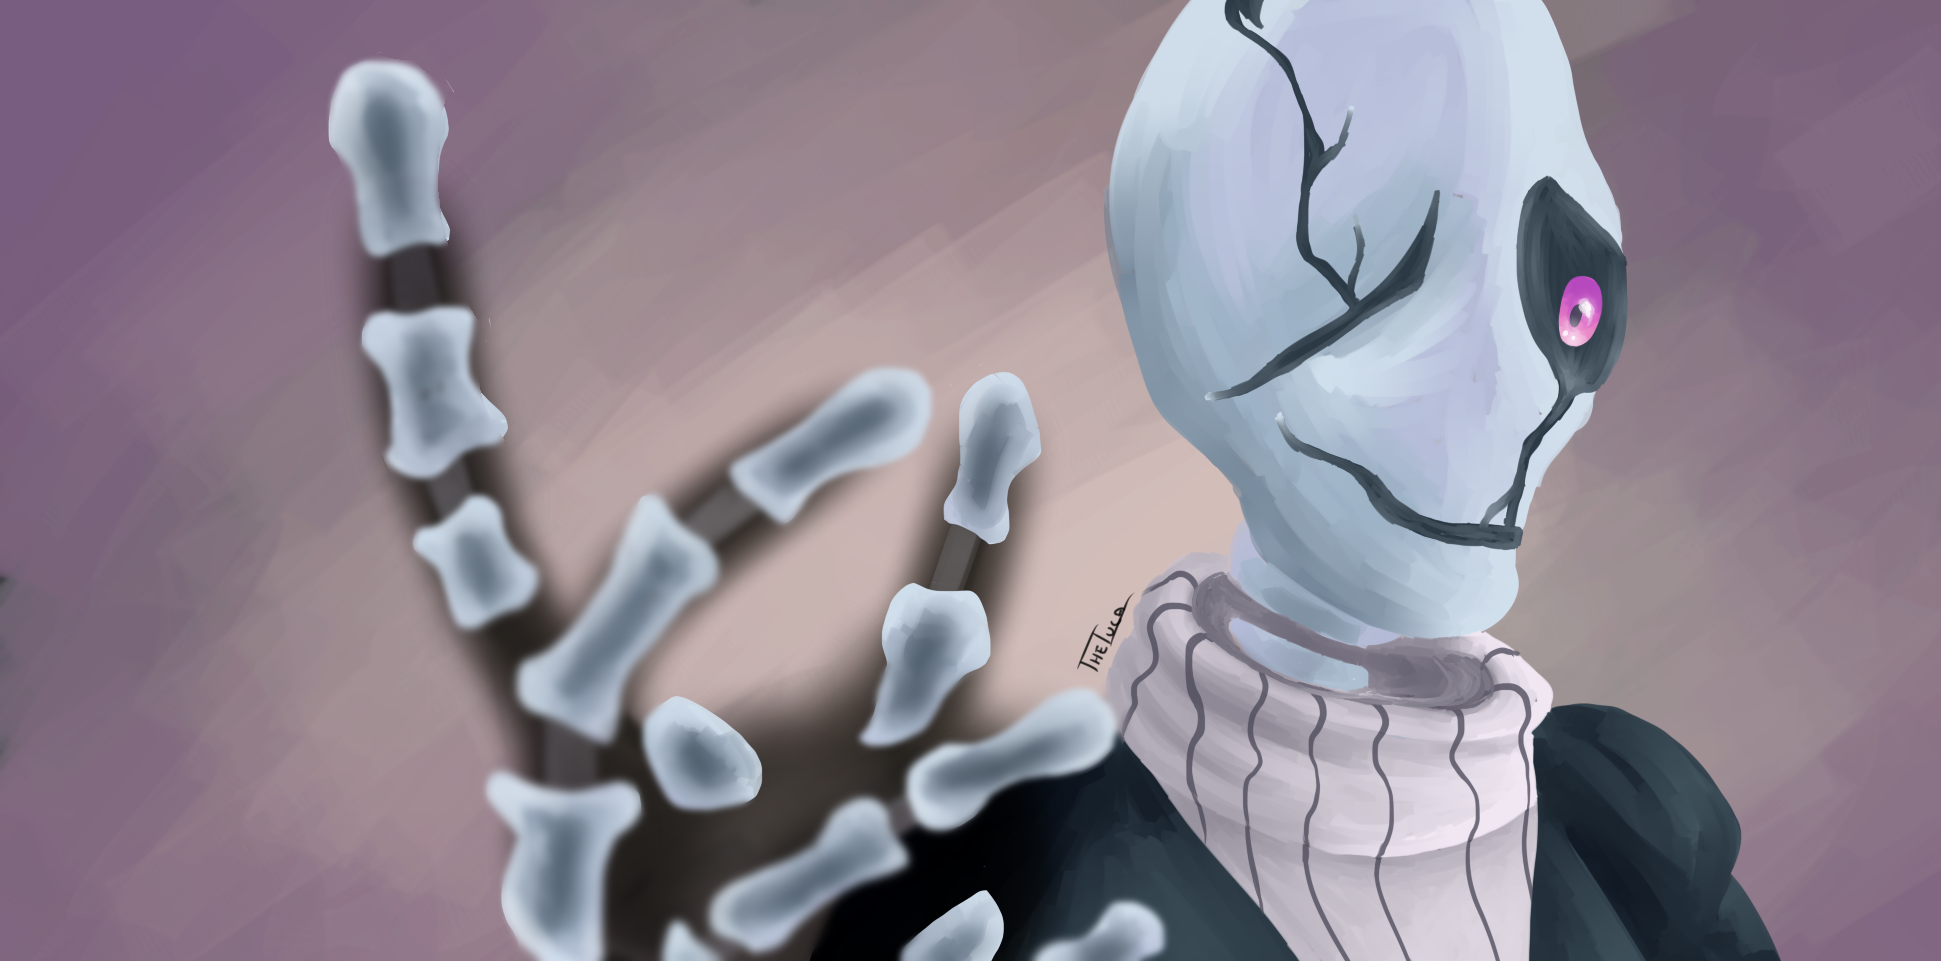 gaster_by_shaymin_lea-dcl1bul.png